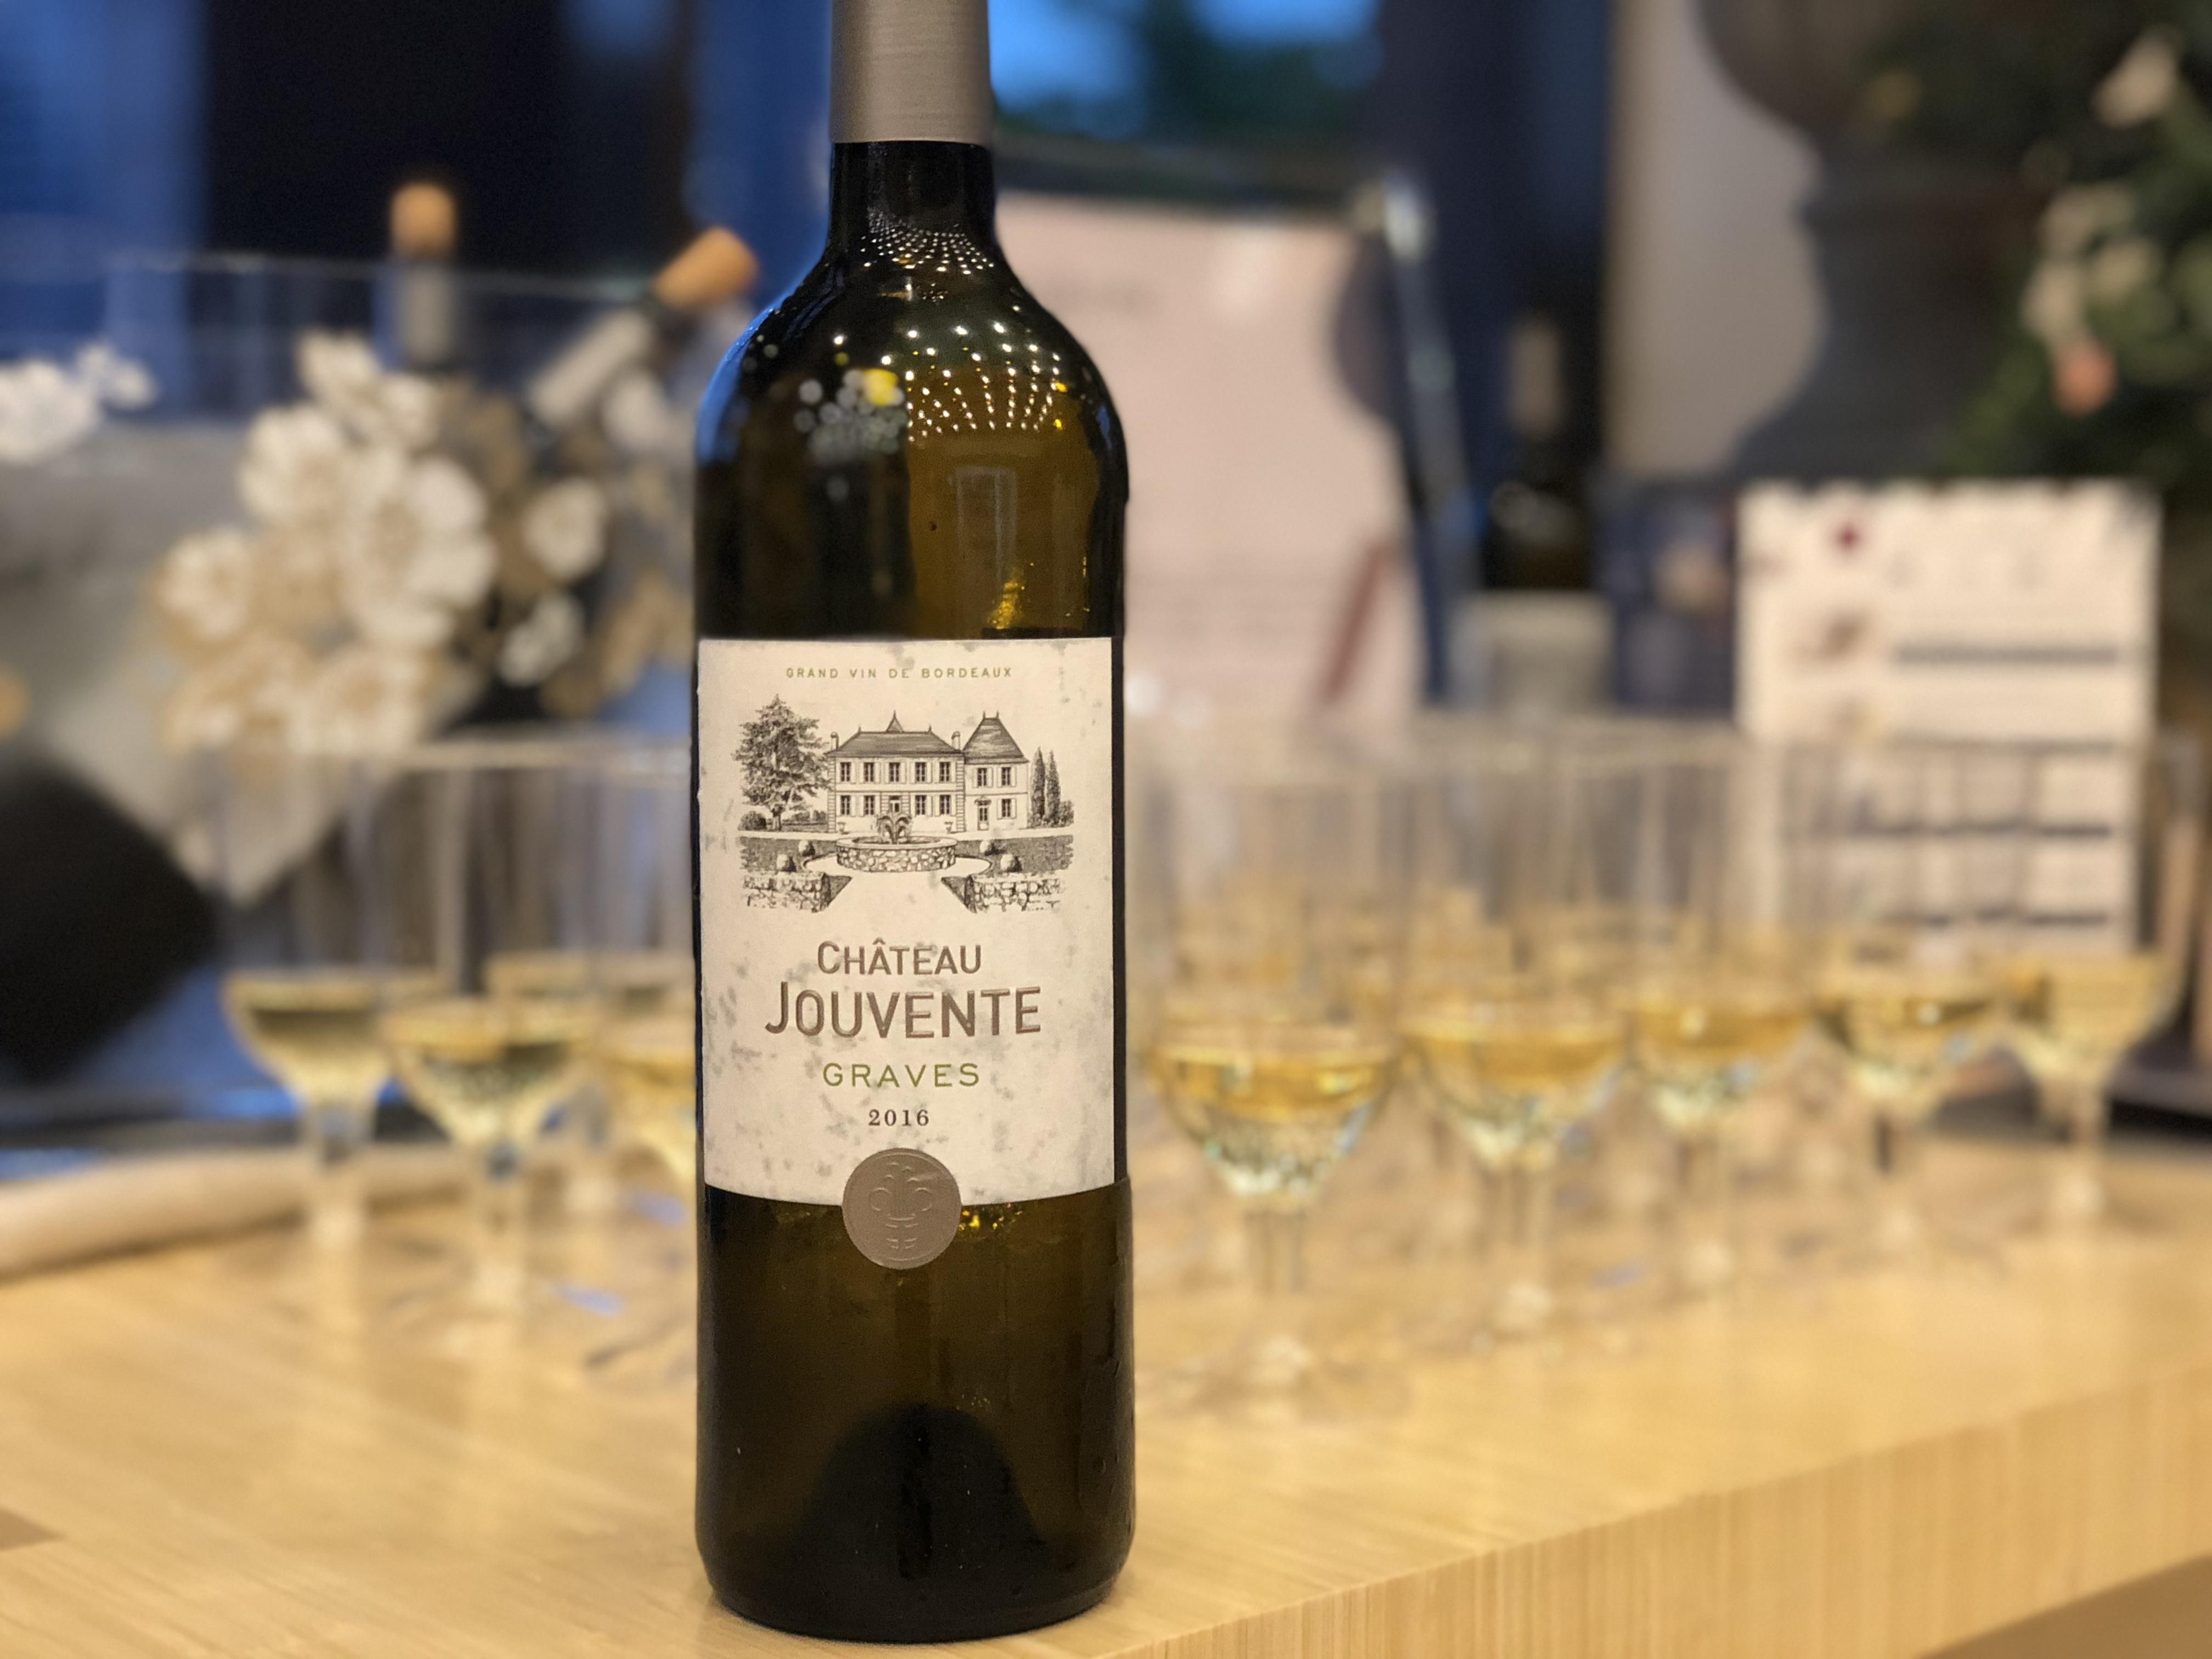 White wine from Chateau Jouvente